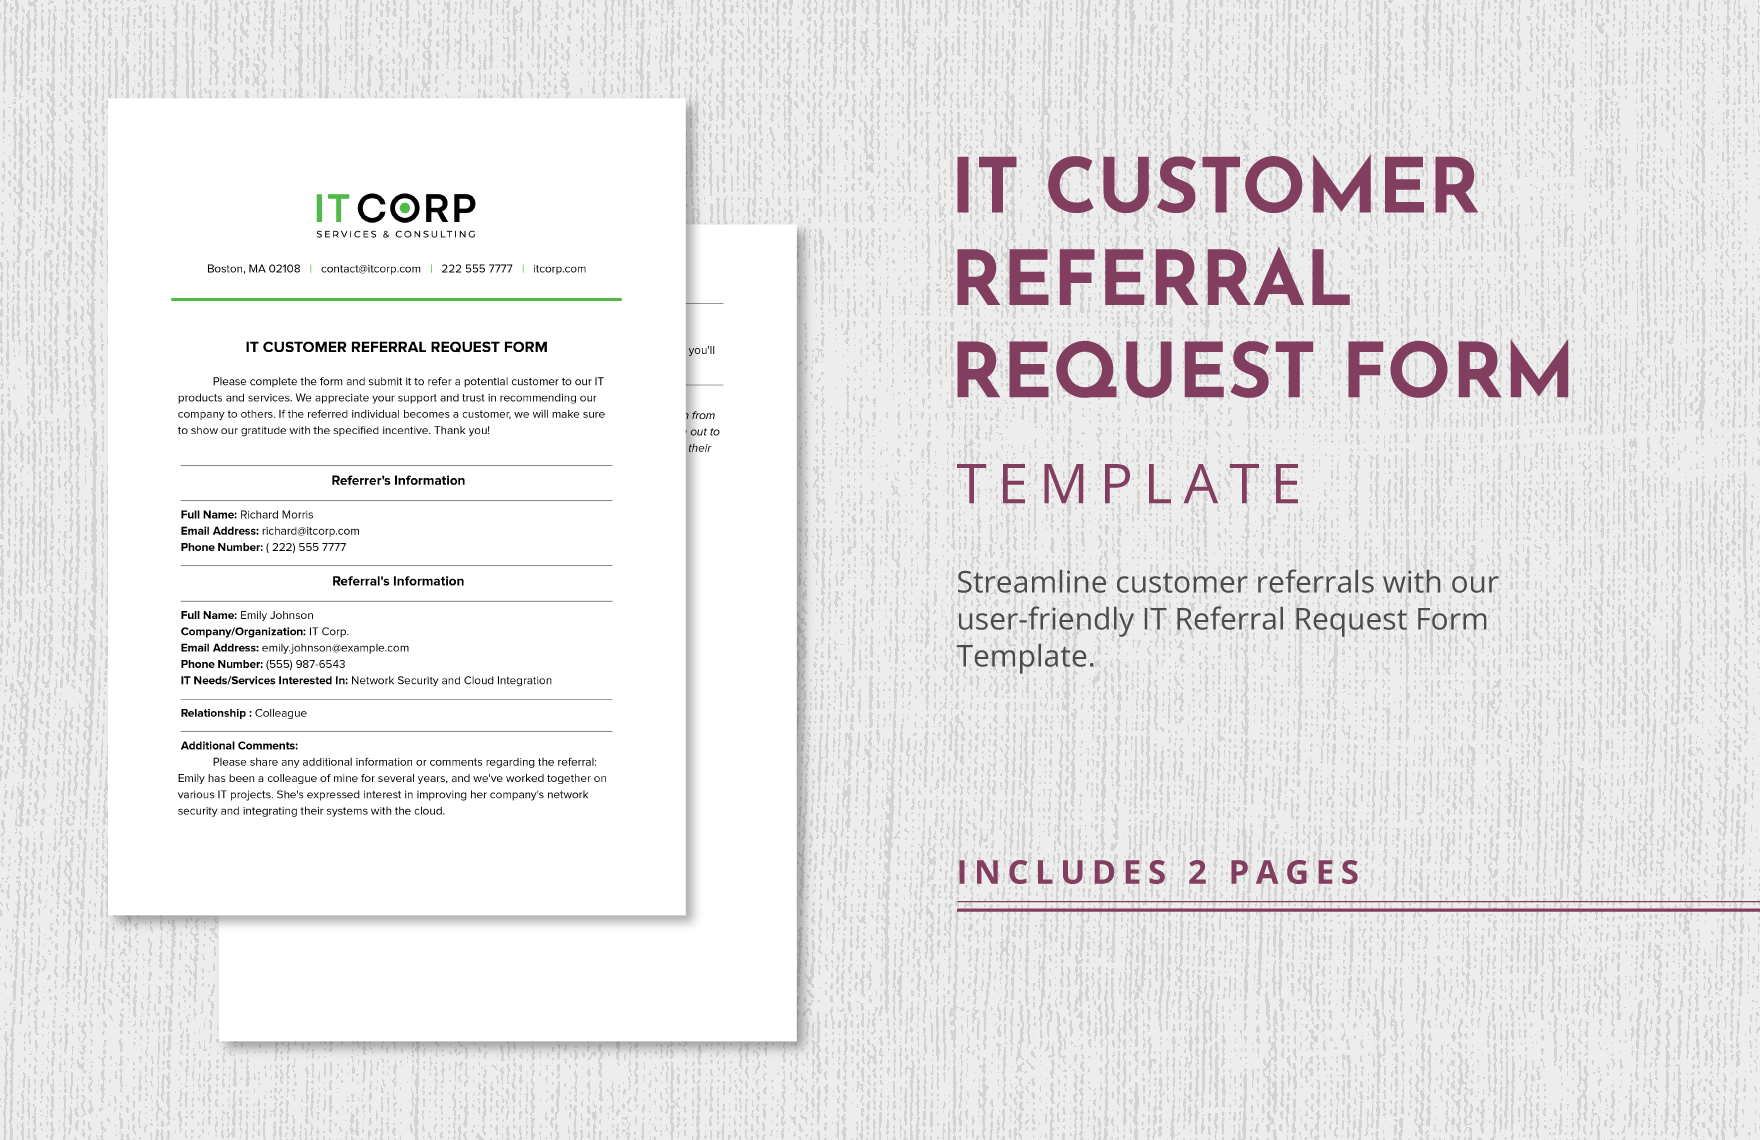 IT Customer Referral Request Form Template